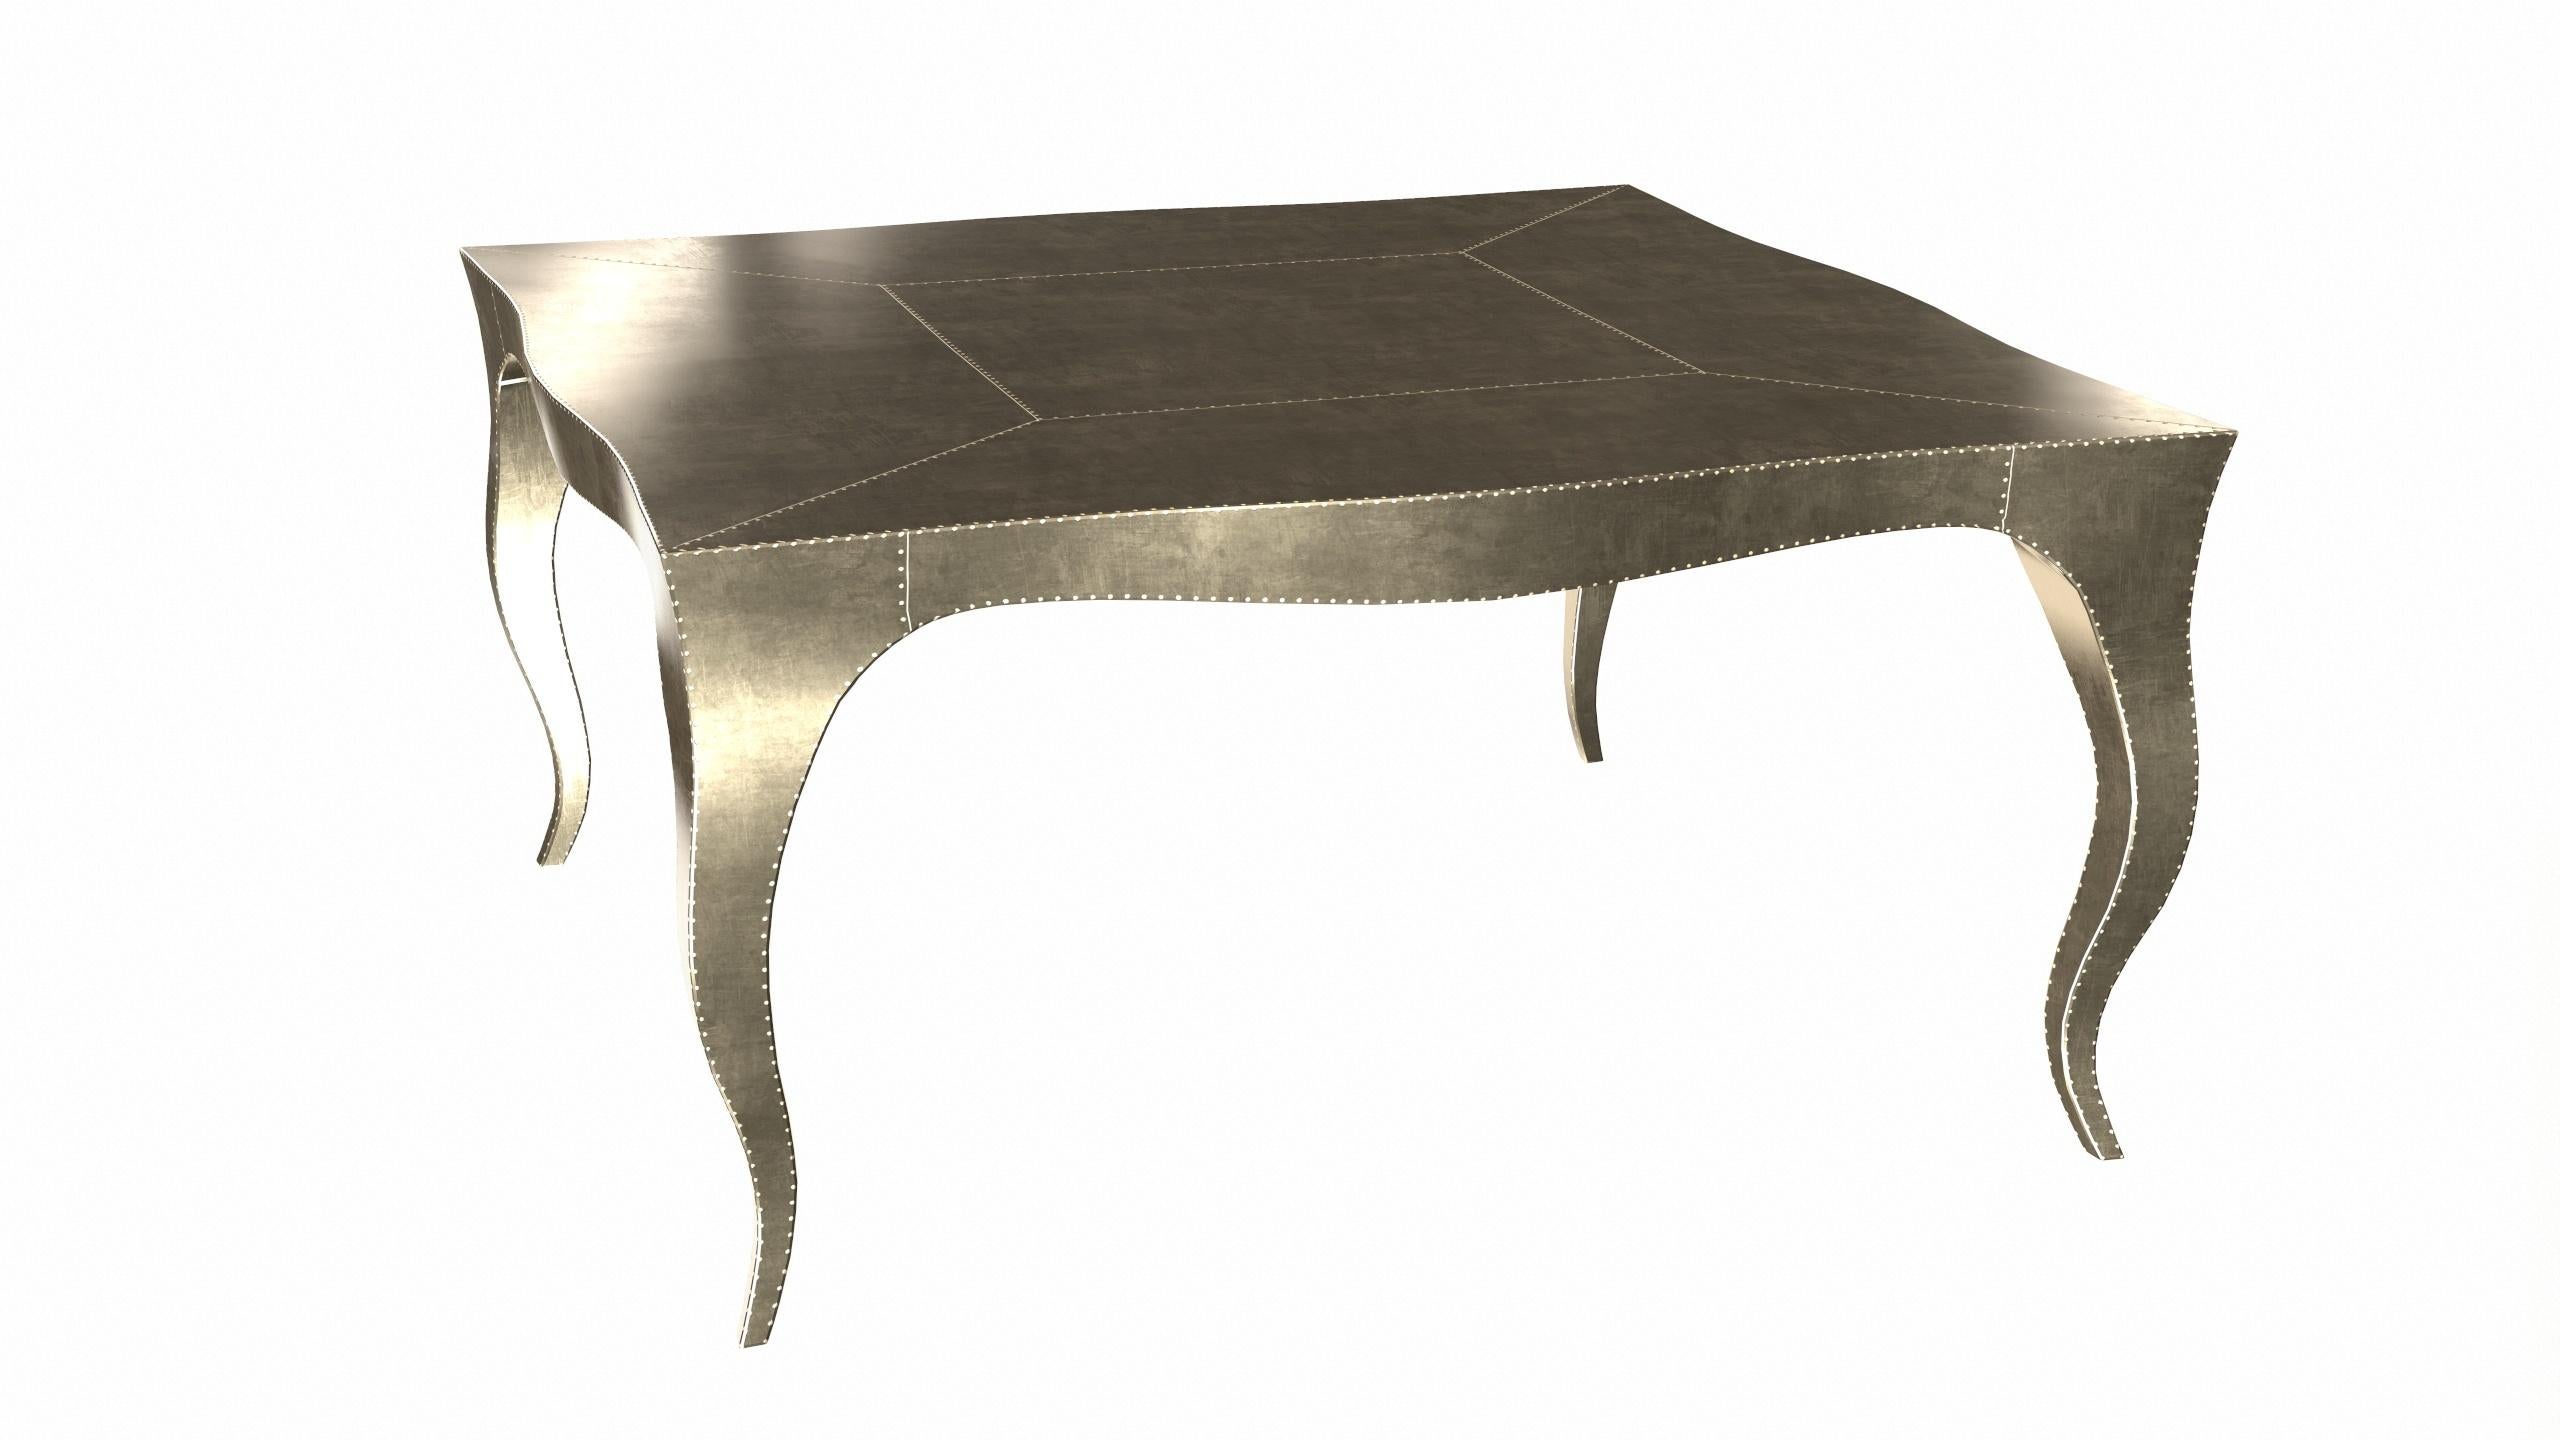 Louise Art Deco Nesting Tables Smooth Brass 18.5x18.5x10 inch by Paul M. en vente 3